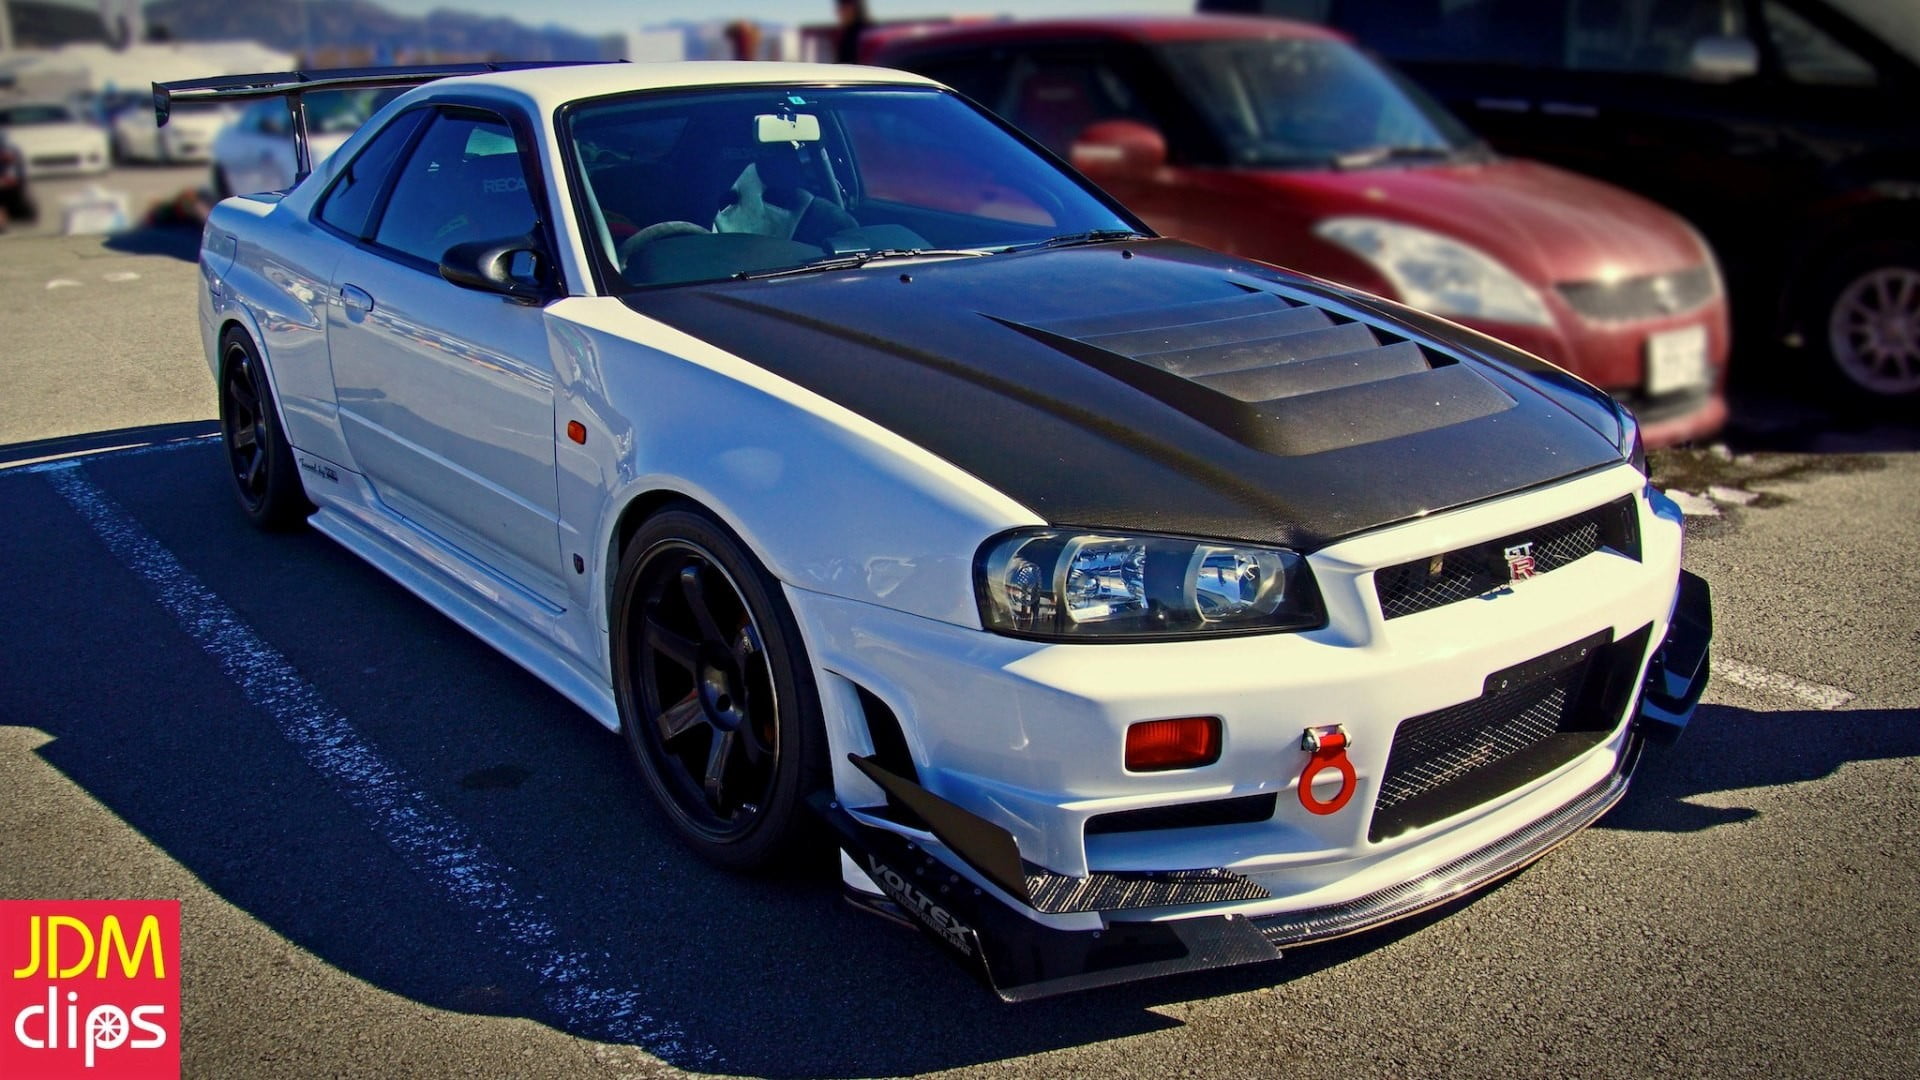 White And Black Coupe Nissan Skyline Gt R R34 V Spec Ii Nissan Skyline Gt R R34 Nissan Jdm Hd Wallpaper Wallpaper Flare